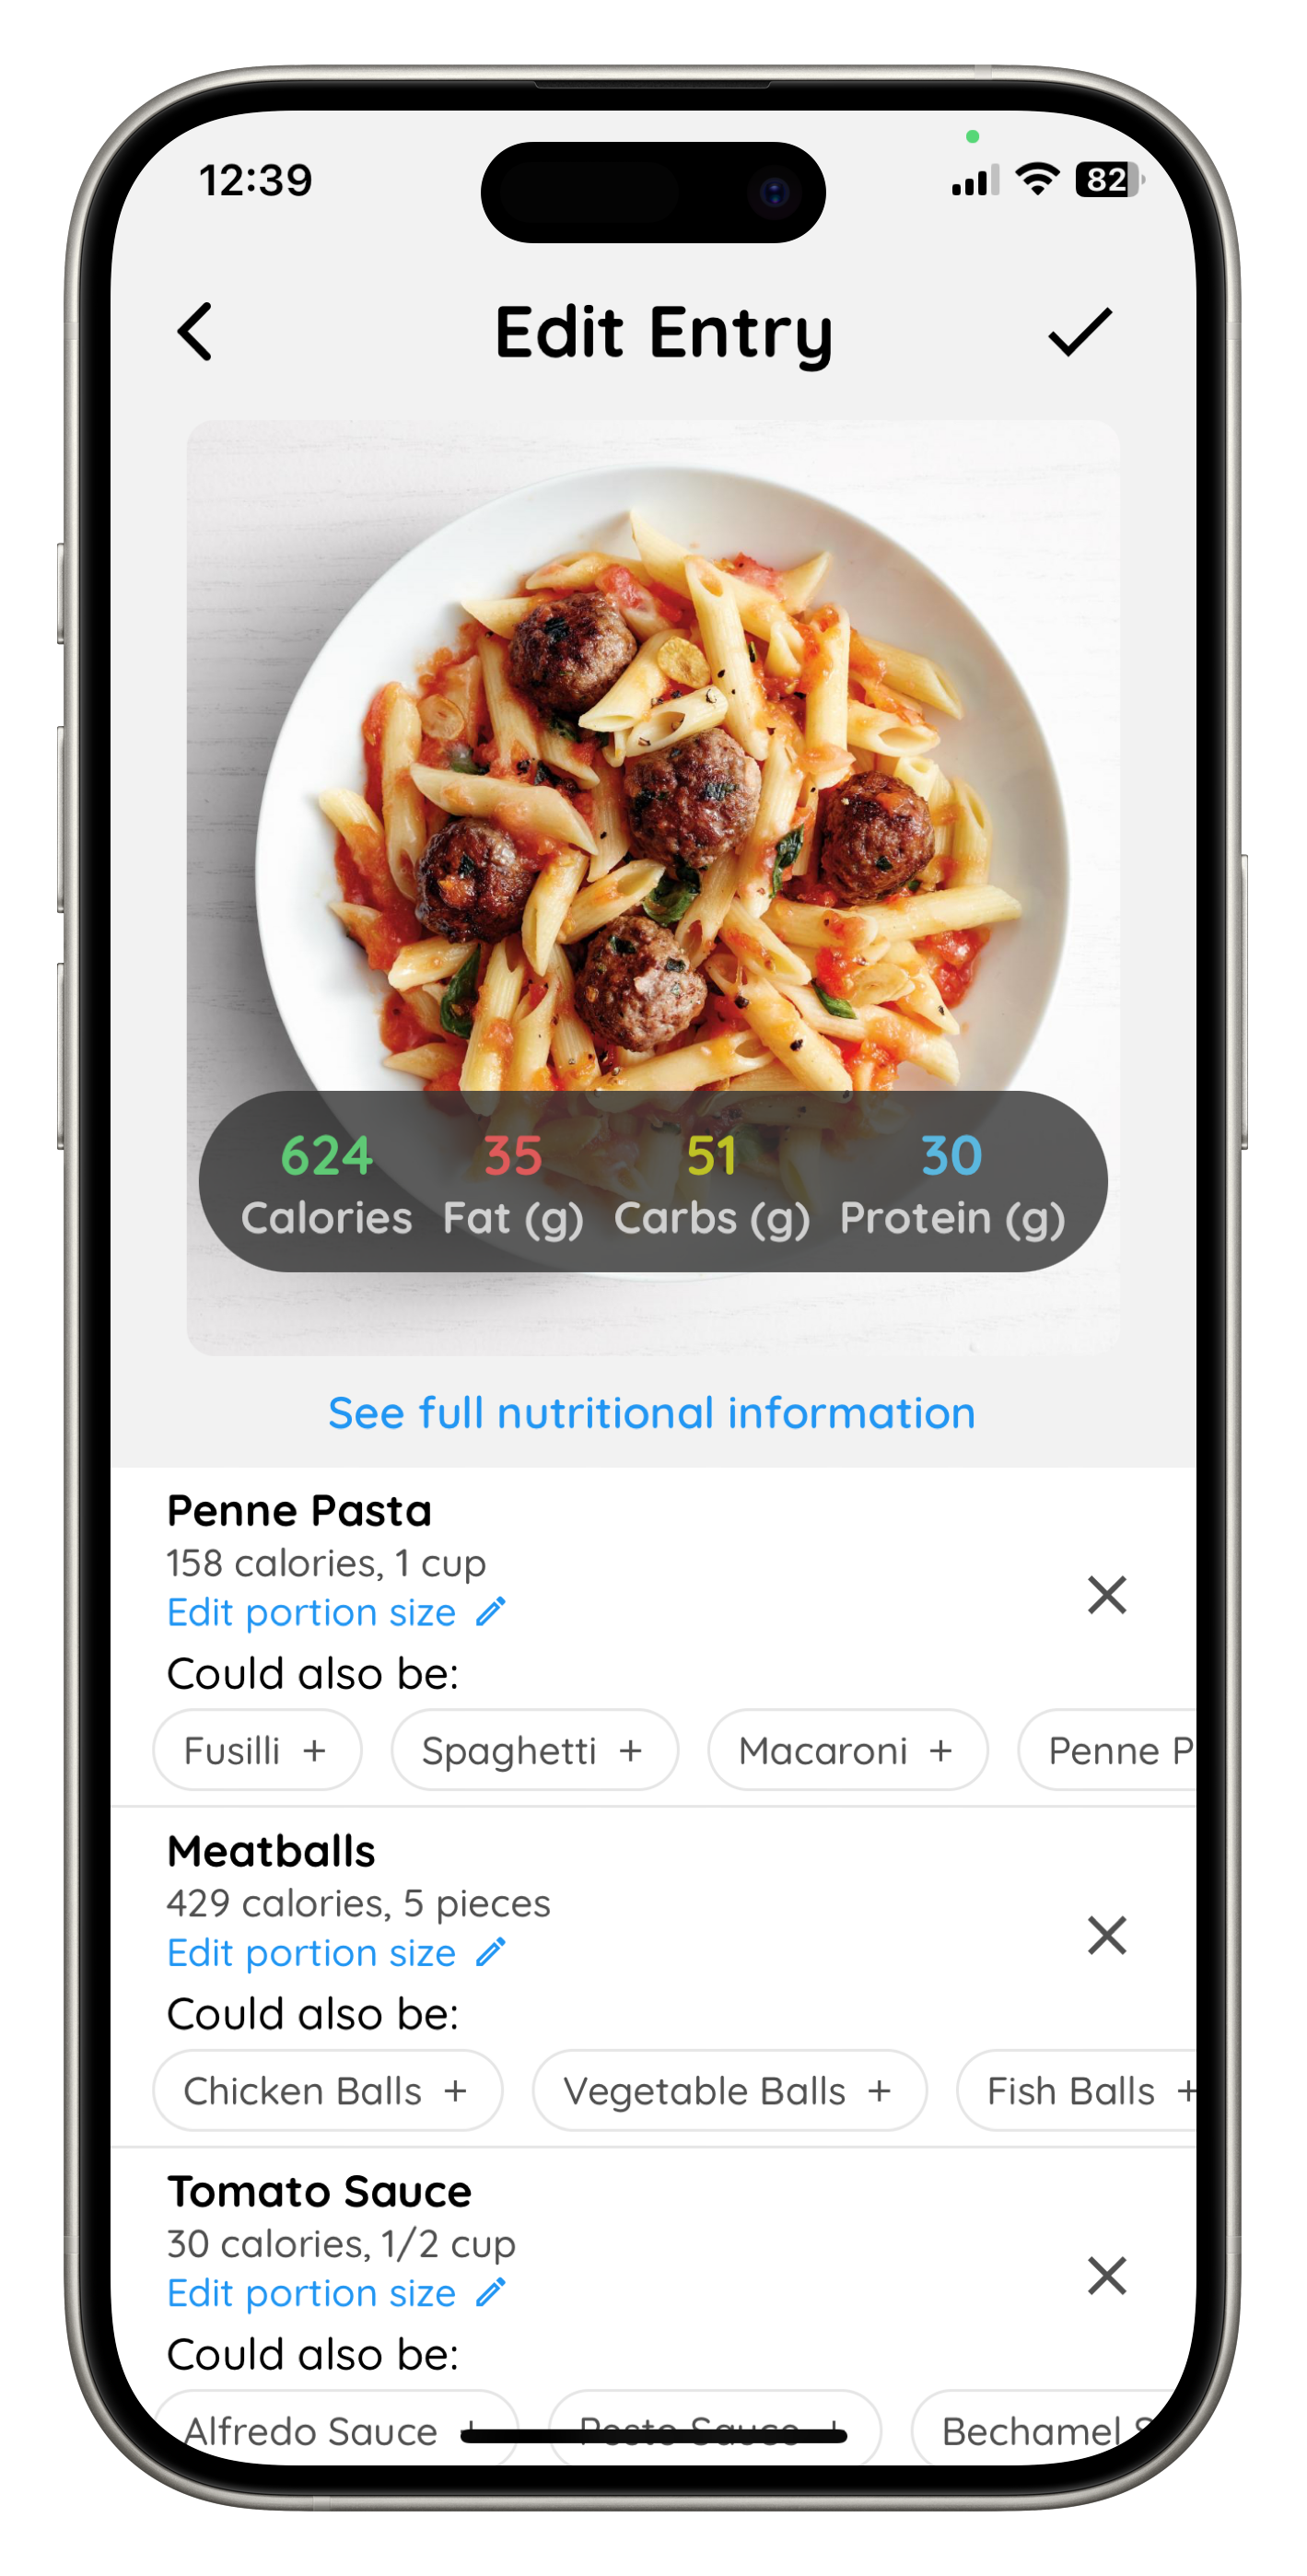 Photo calorie counting app SnapCalorie on an iOS mobile device.